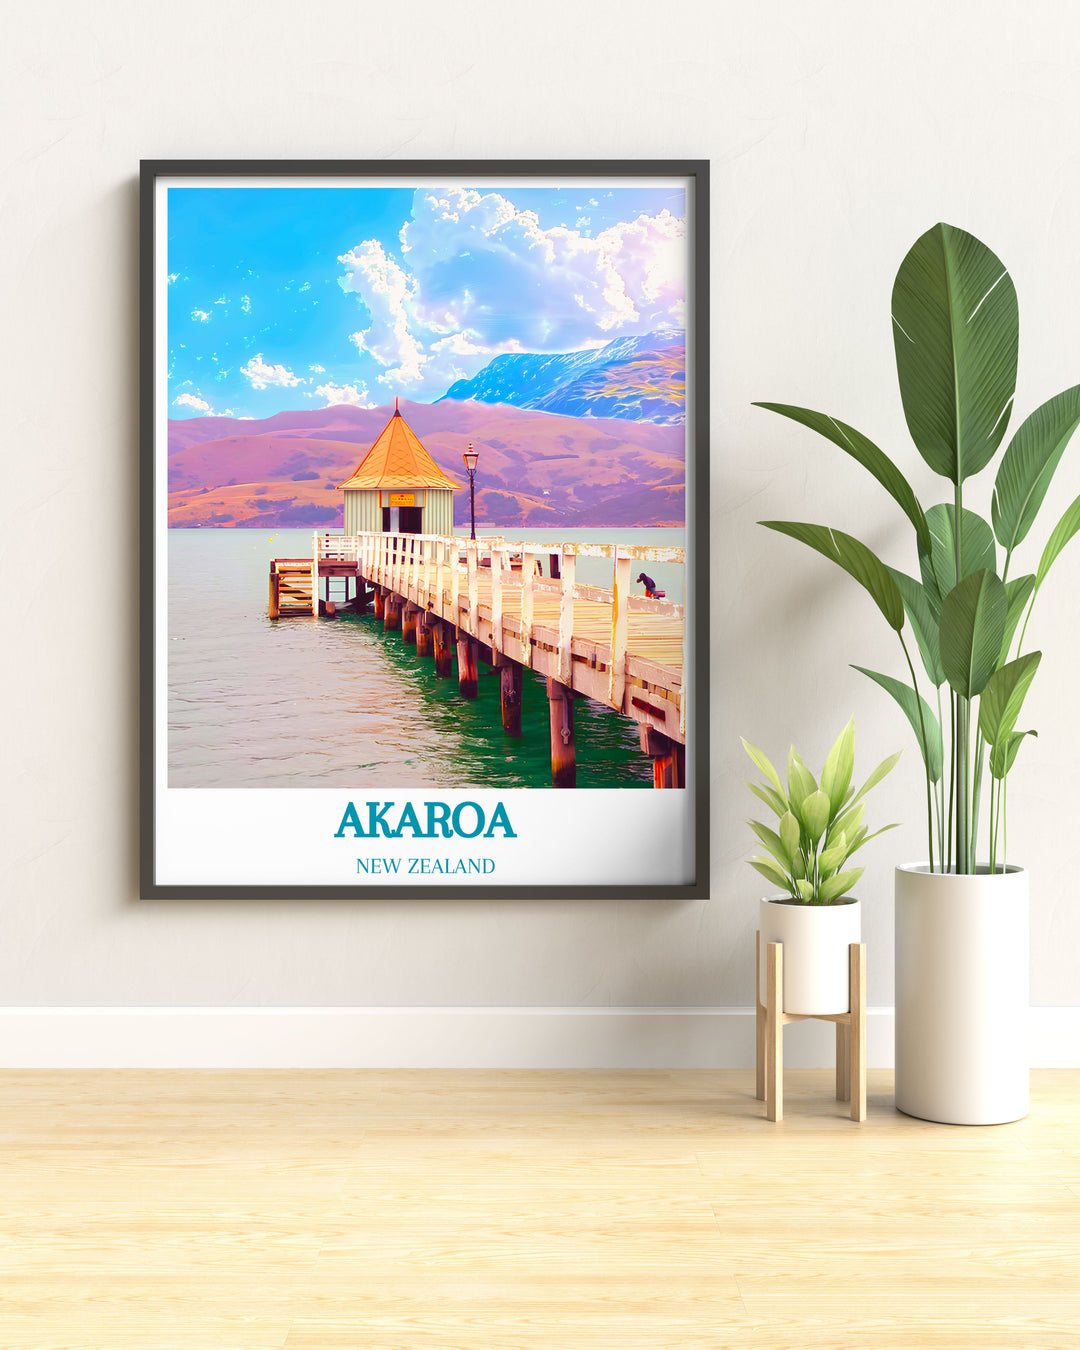 Vintage poster of New Zealand landscapes, perfect for adding a touch of retro style to modern spaces.